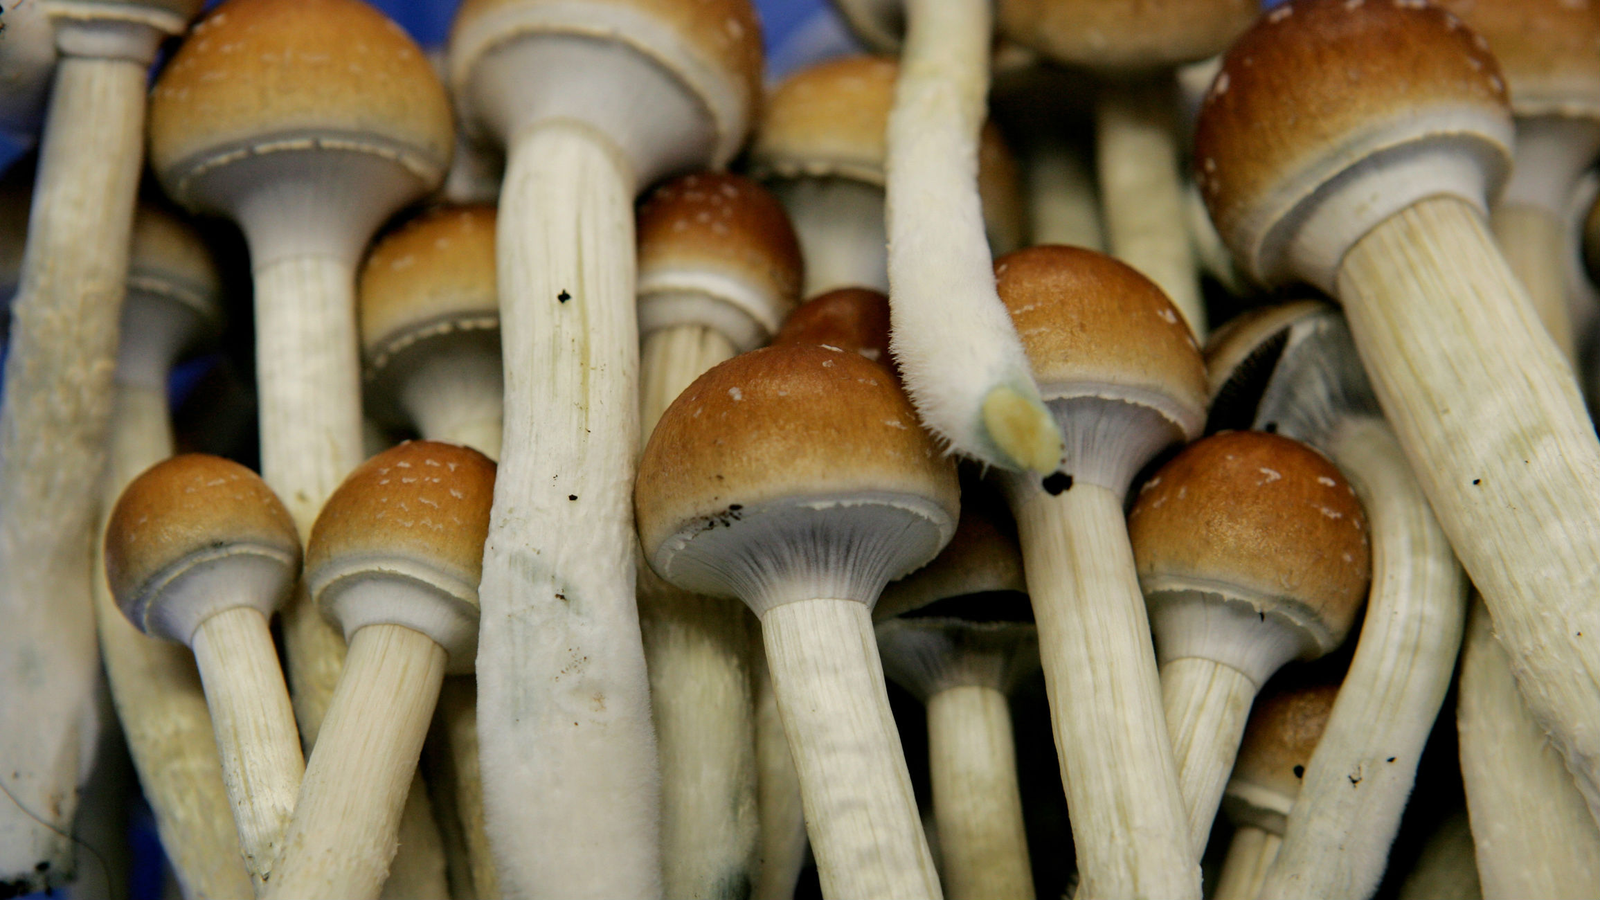 5 Factors To Consider When Buying Magic Mushrooms Online safely